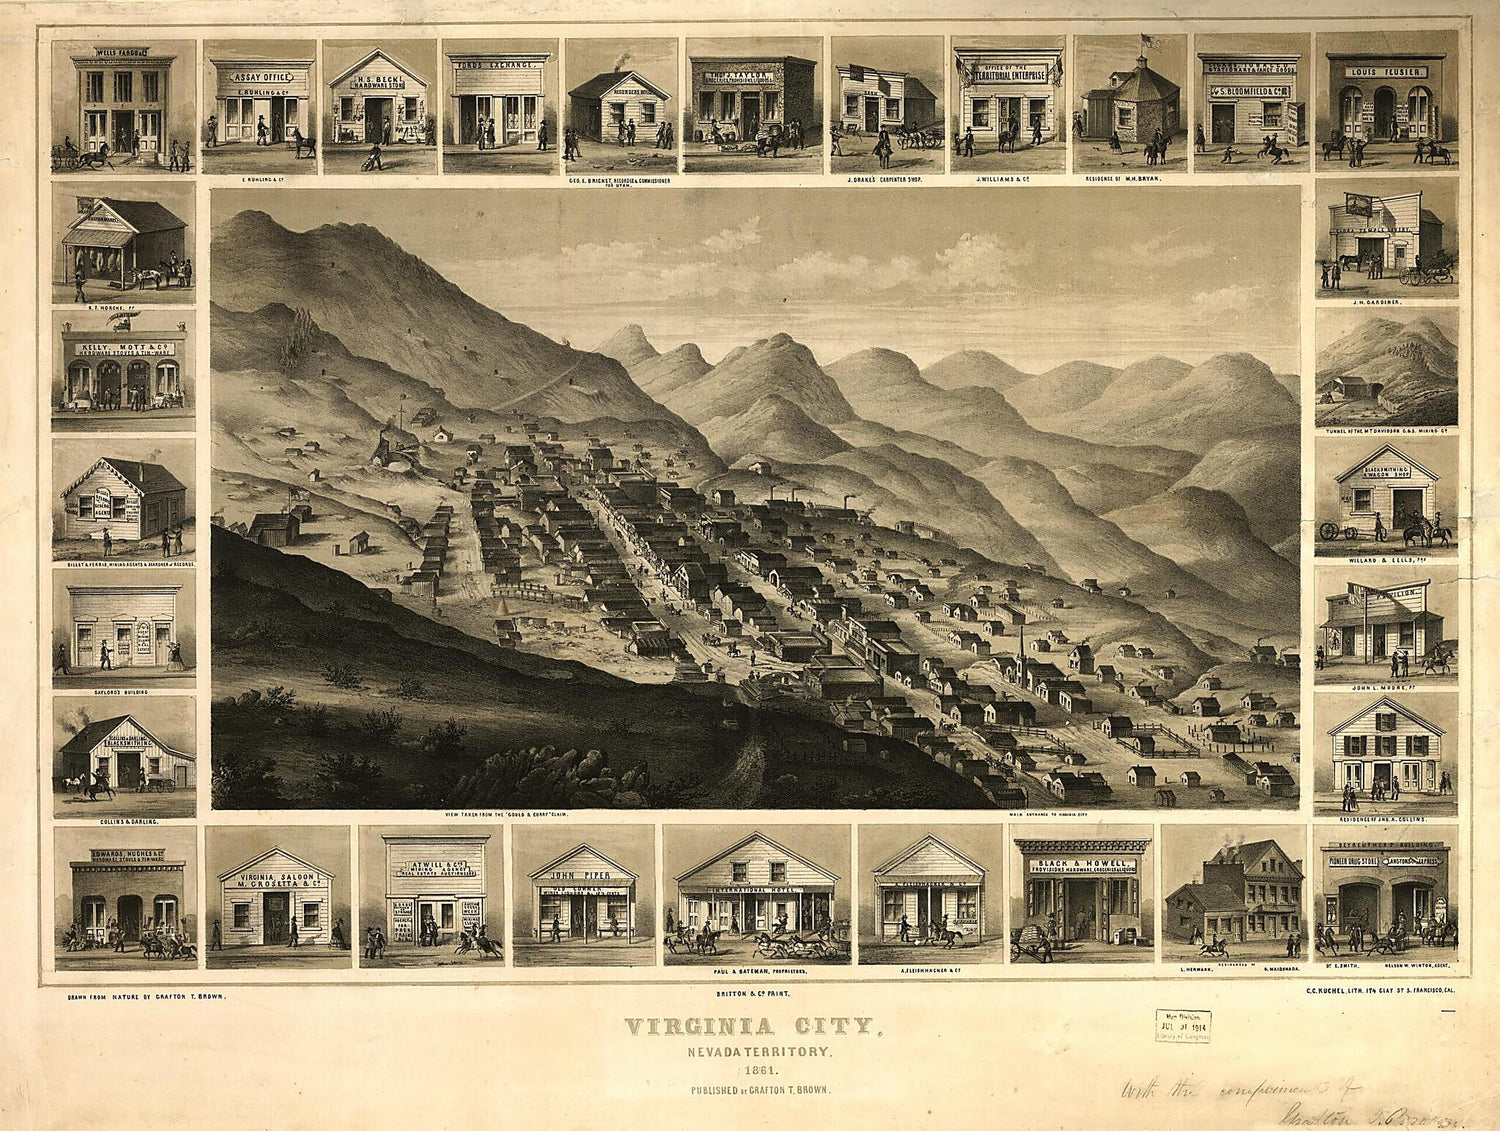 This old map of Virginia City, Nevada Territory, 1861 / Drawn from Nature by Grafton T. Brown ; C.C. Kuchel, Lith from 1861, 1911 was created by Grafton Tyler Brown, Lewis Wickes Hine, Charles Conrad Kuchel in 1861, 1911